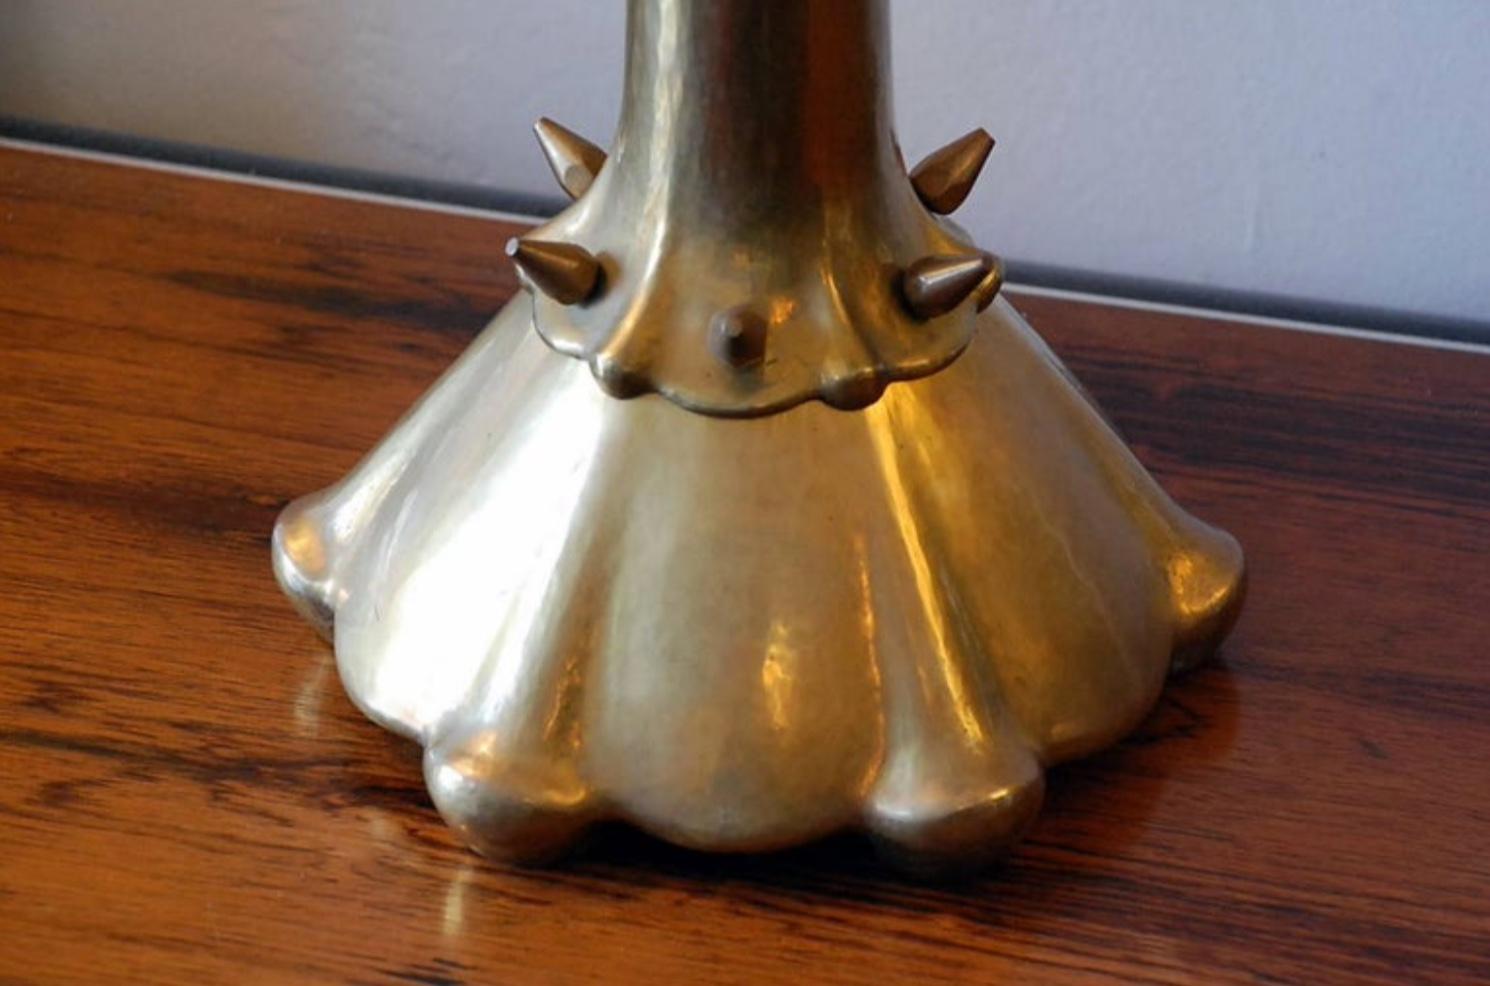 Dutch Rare Hammered Brass Candlestick by Atelier Brom For Sale